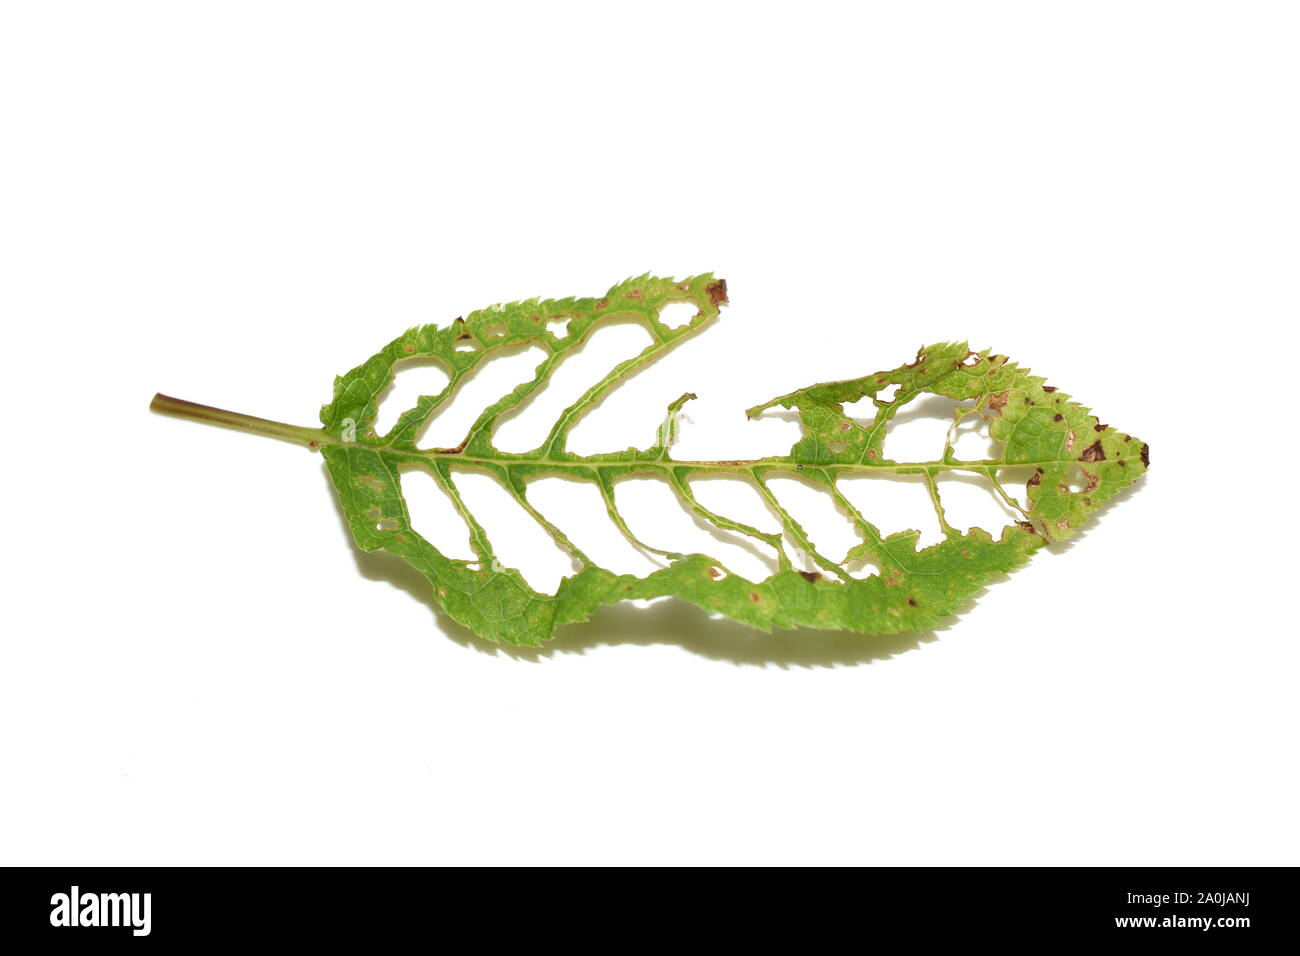 Holes in leaf from bird cherry tree damaged by pest insects Stock Photo